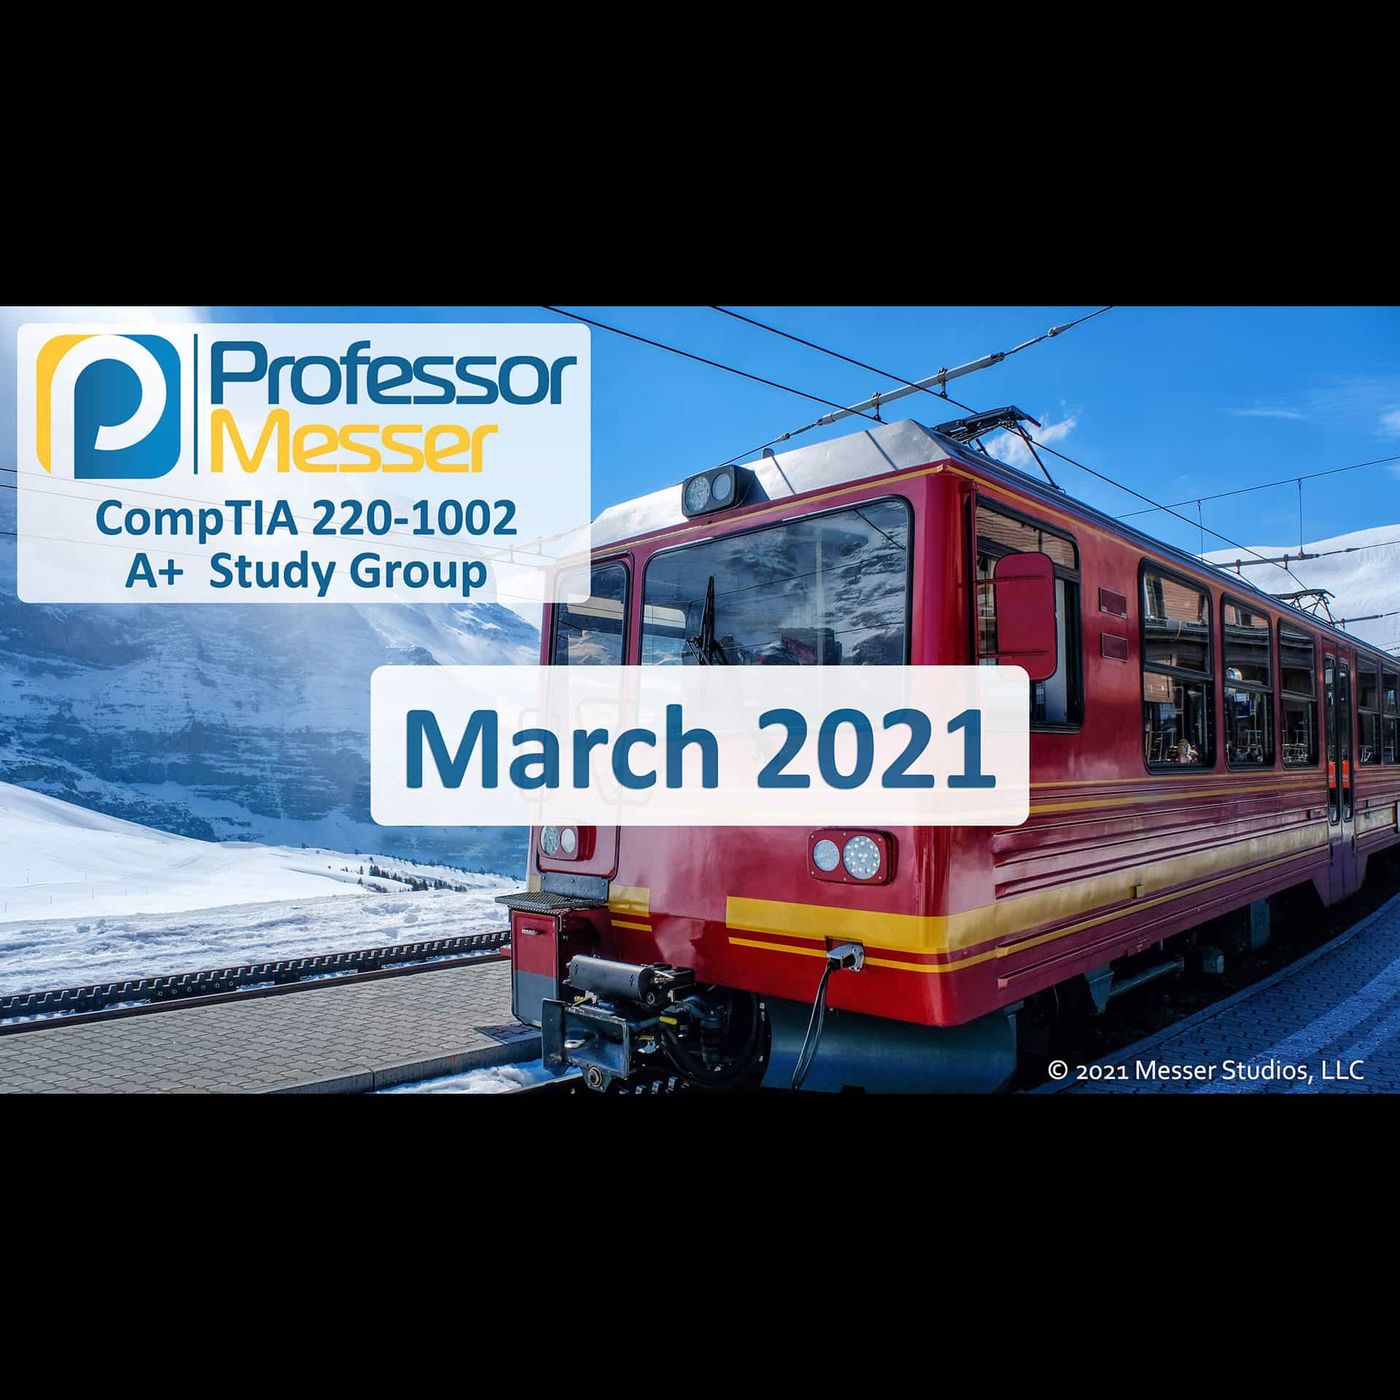 Professor Messer's CompTIA 220-1002 A+ Study Group After Show - March 2021